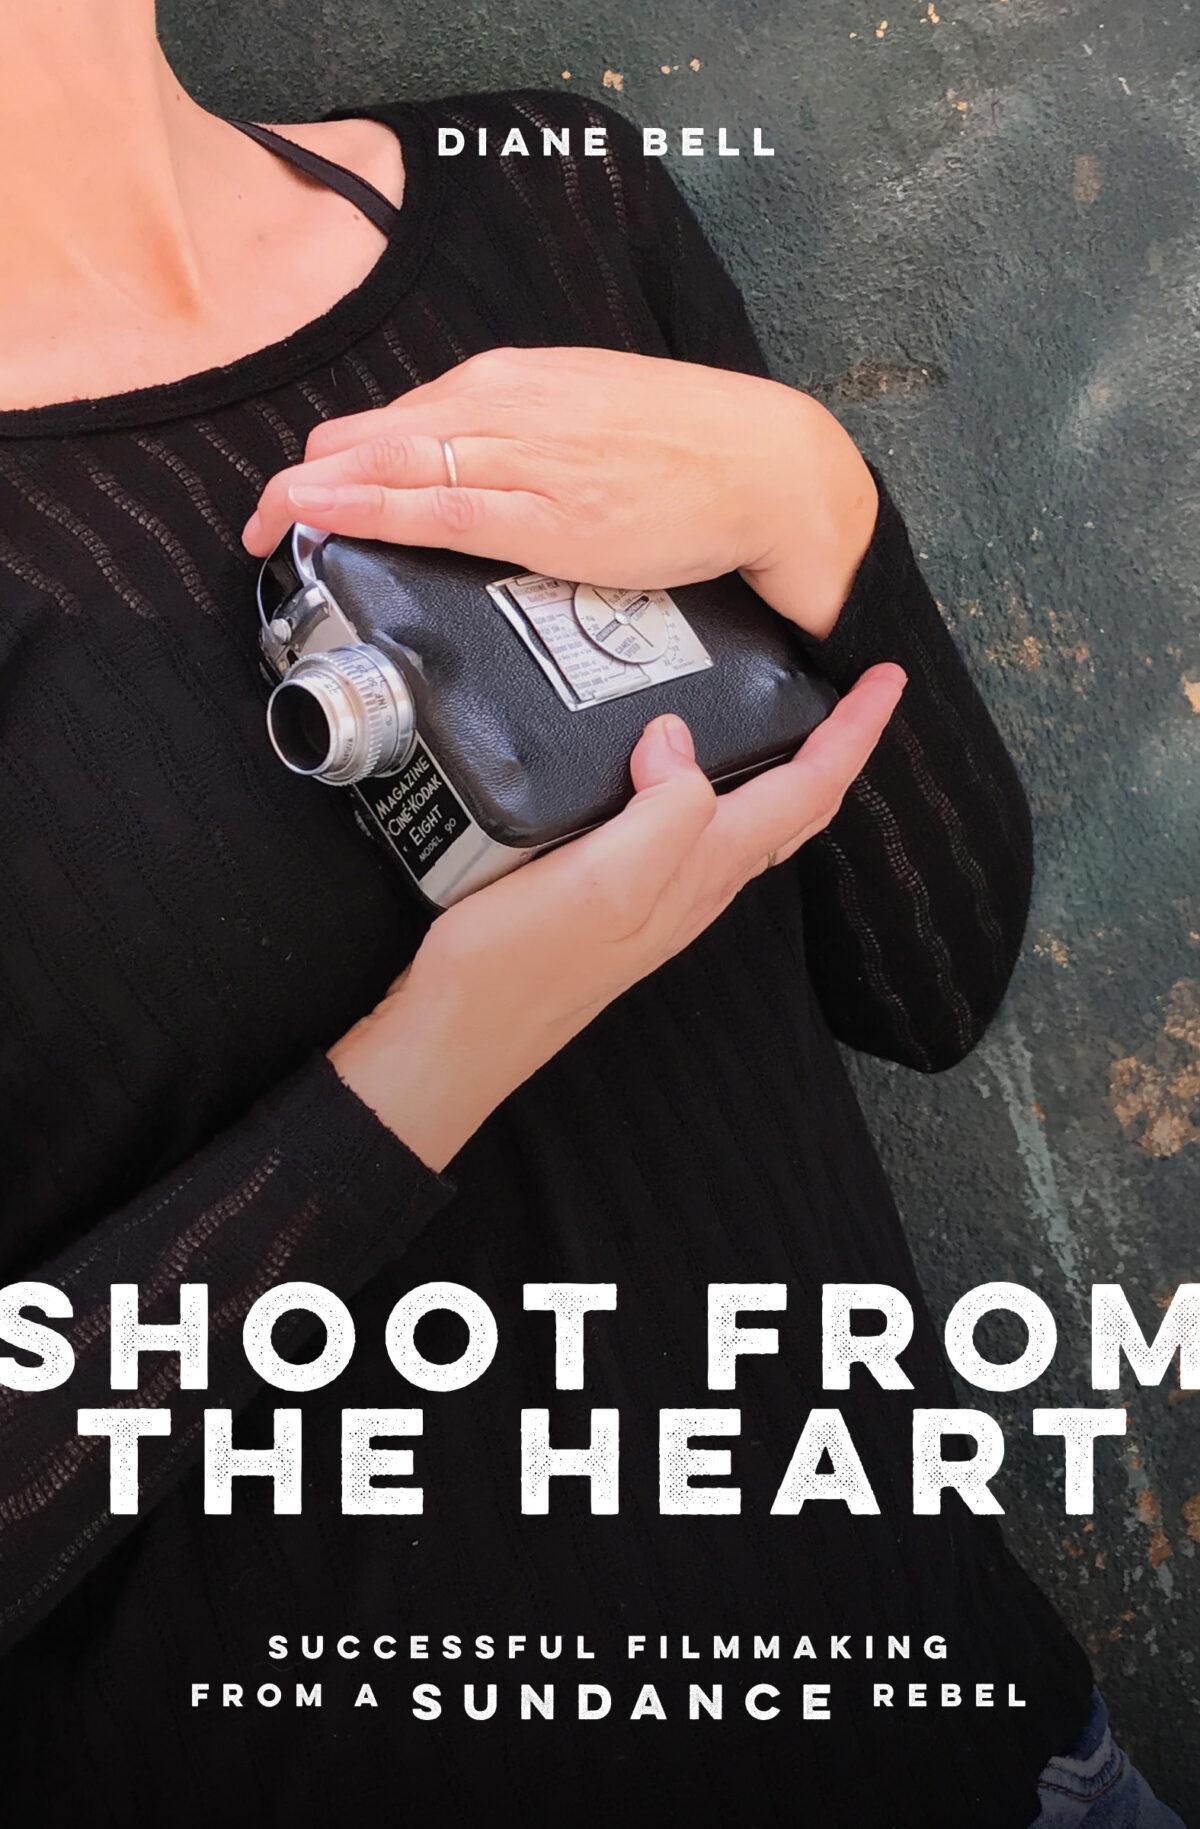 The cover of Diane Bell’s book on filmmaking, “Shoot From the Heart.”